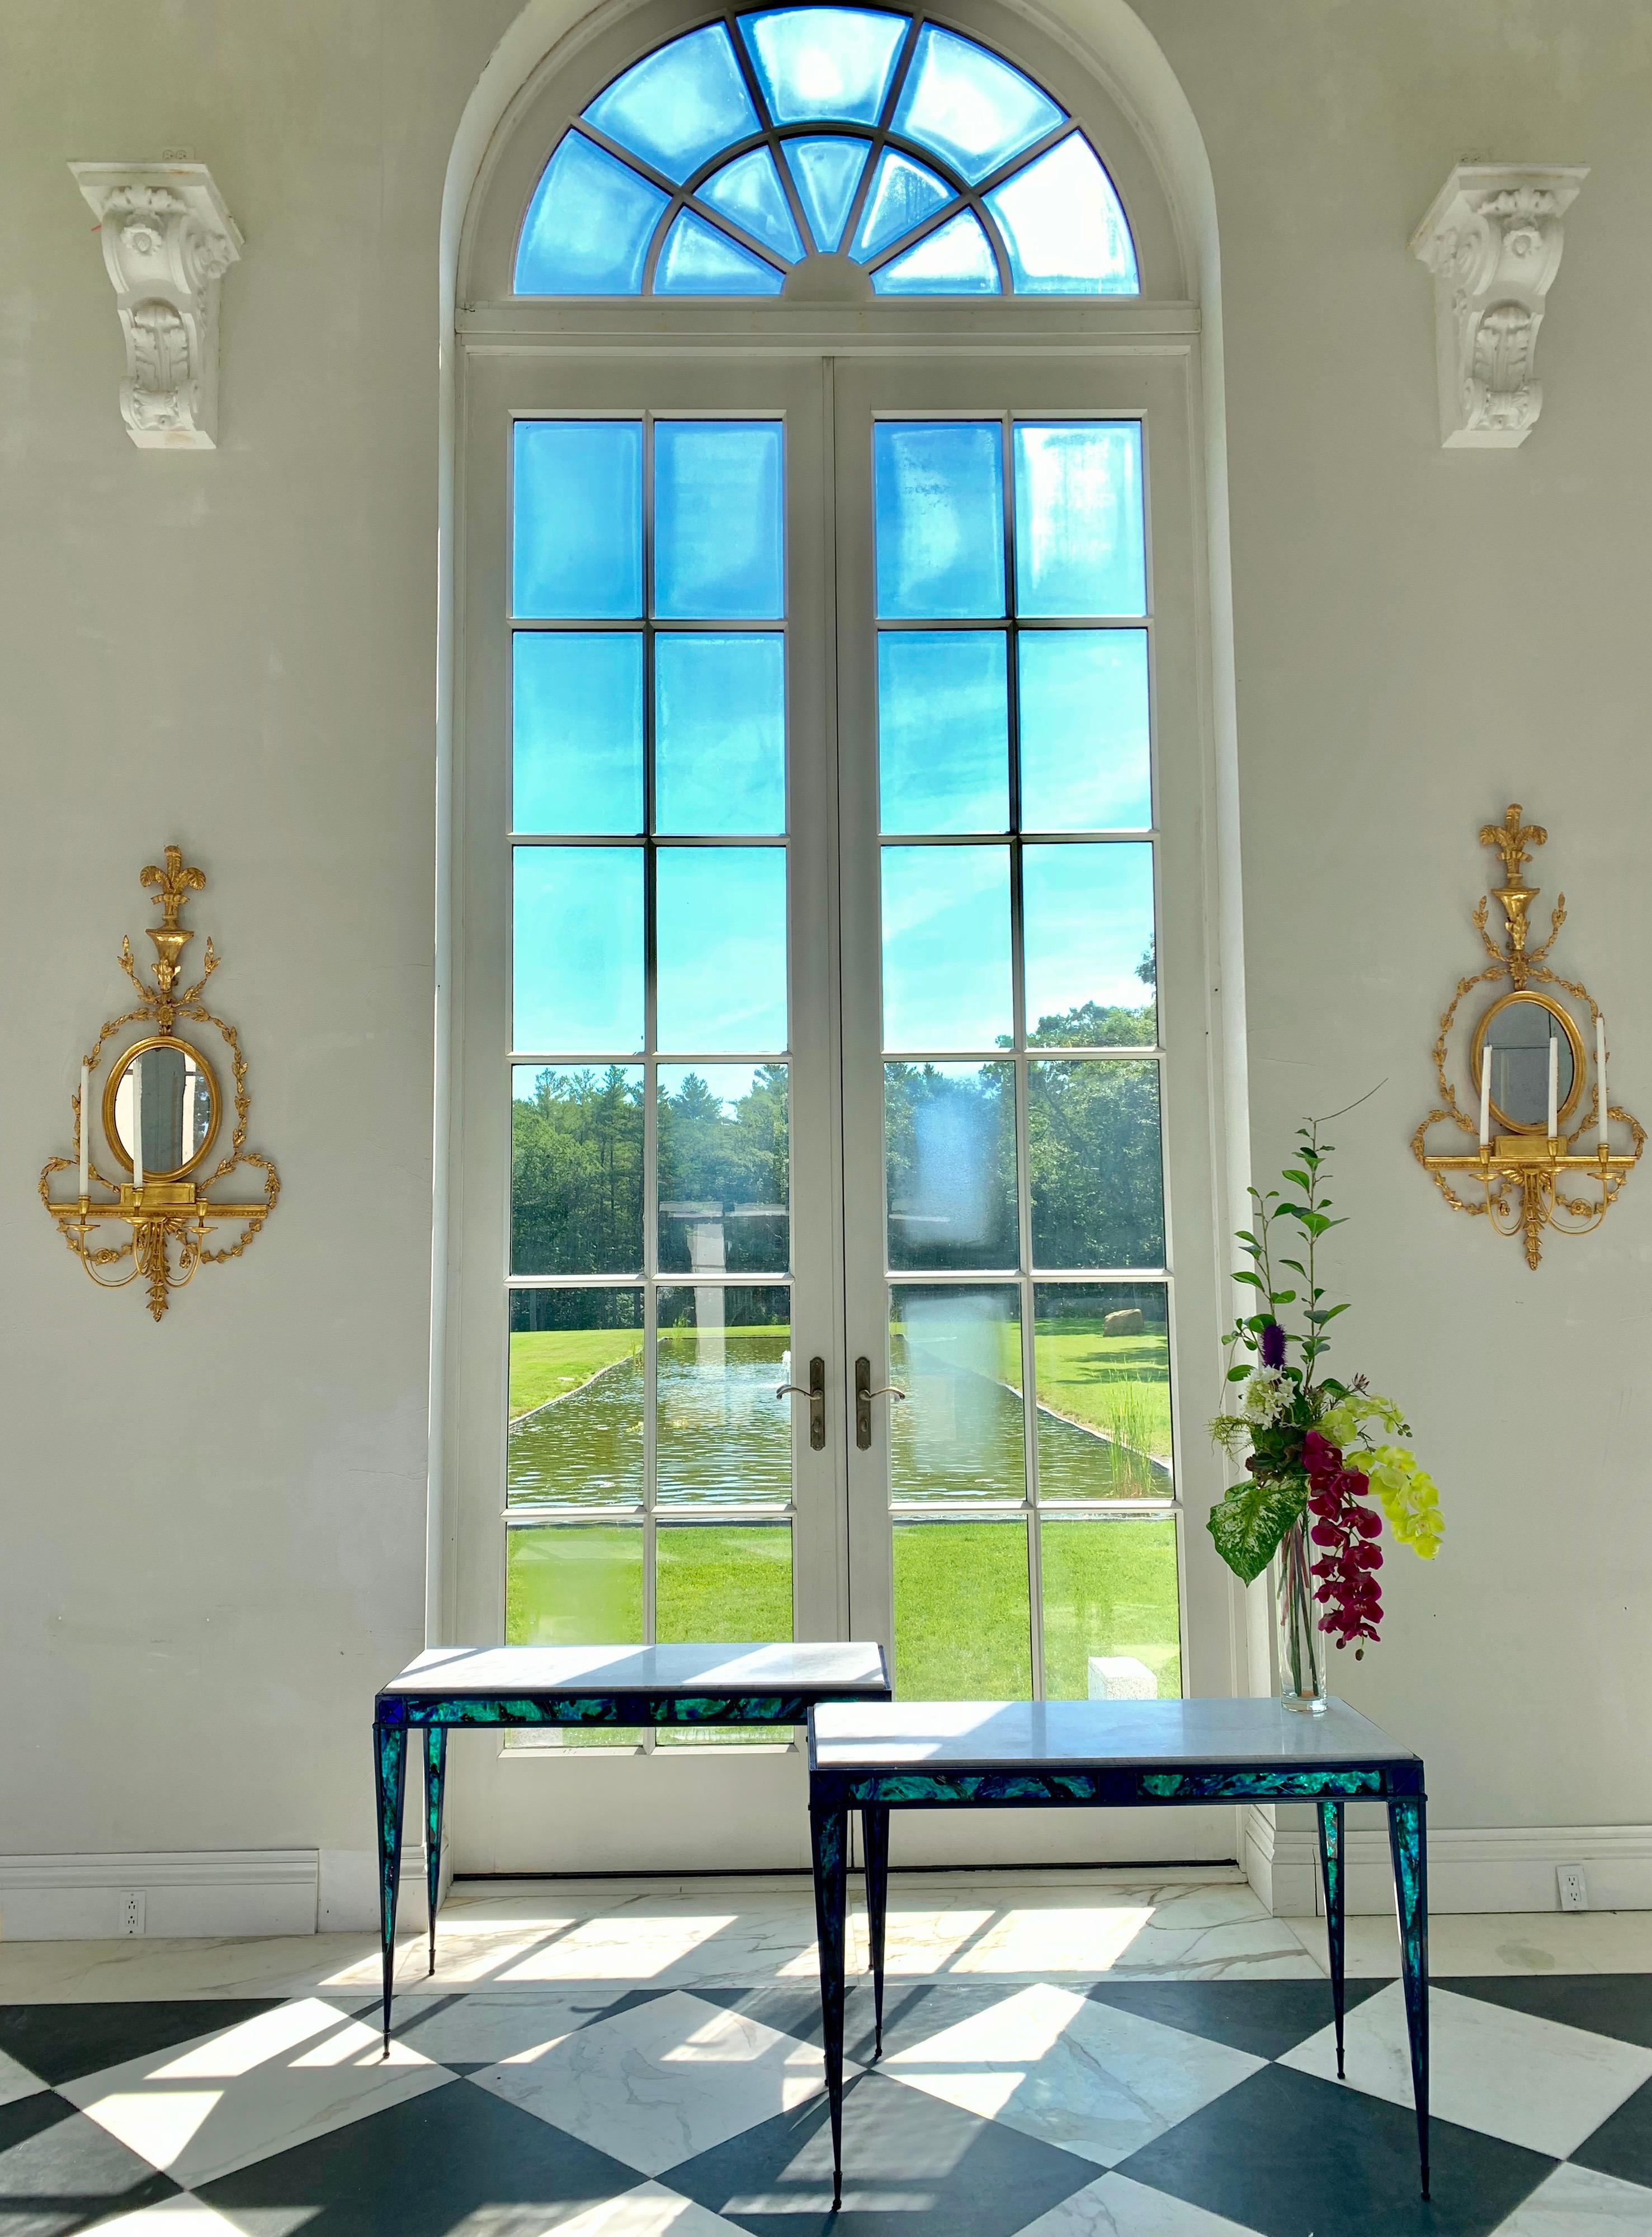 Dom Paragon designed this one of a kind pair of neoclassical inspired console tables.
The handwrought steal frame is powder coated.
The hand blown glass inserts have reverse paint in an abalone color spectrum.
Azur blue, emerald green and